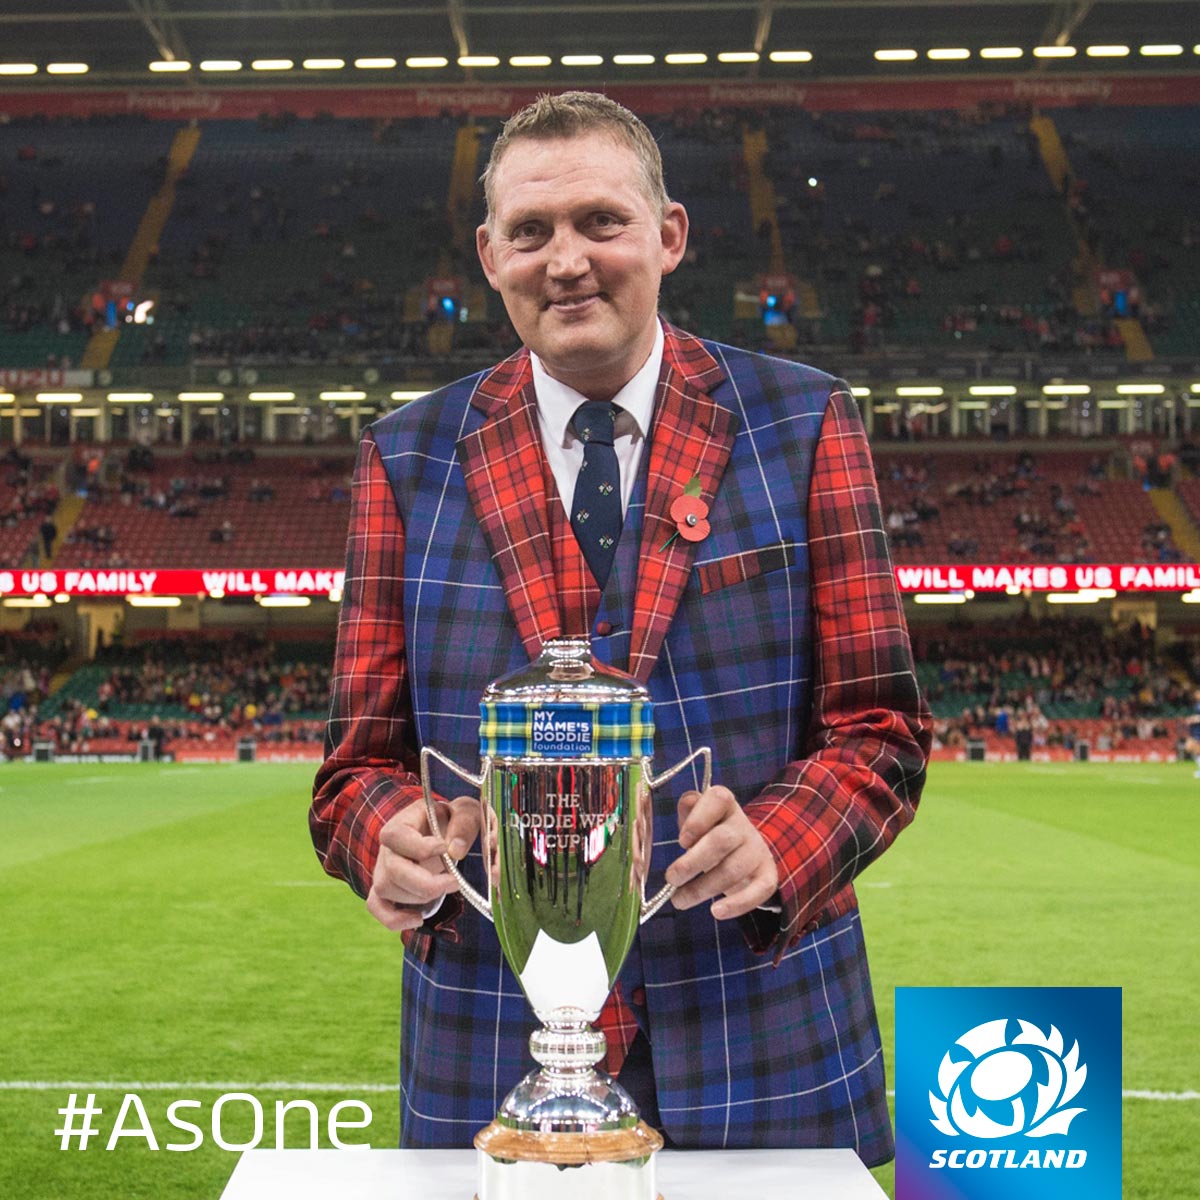 📸| The cup and its namesake get together pre-match! 🏆 #AsOne